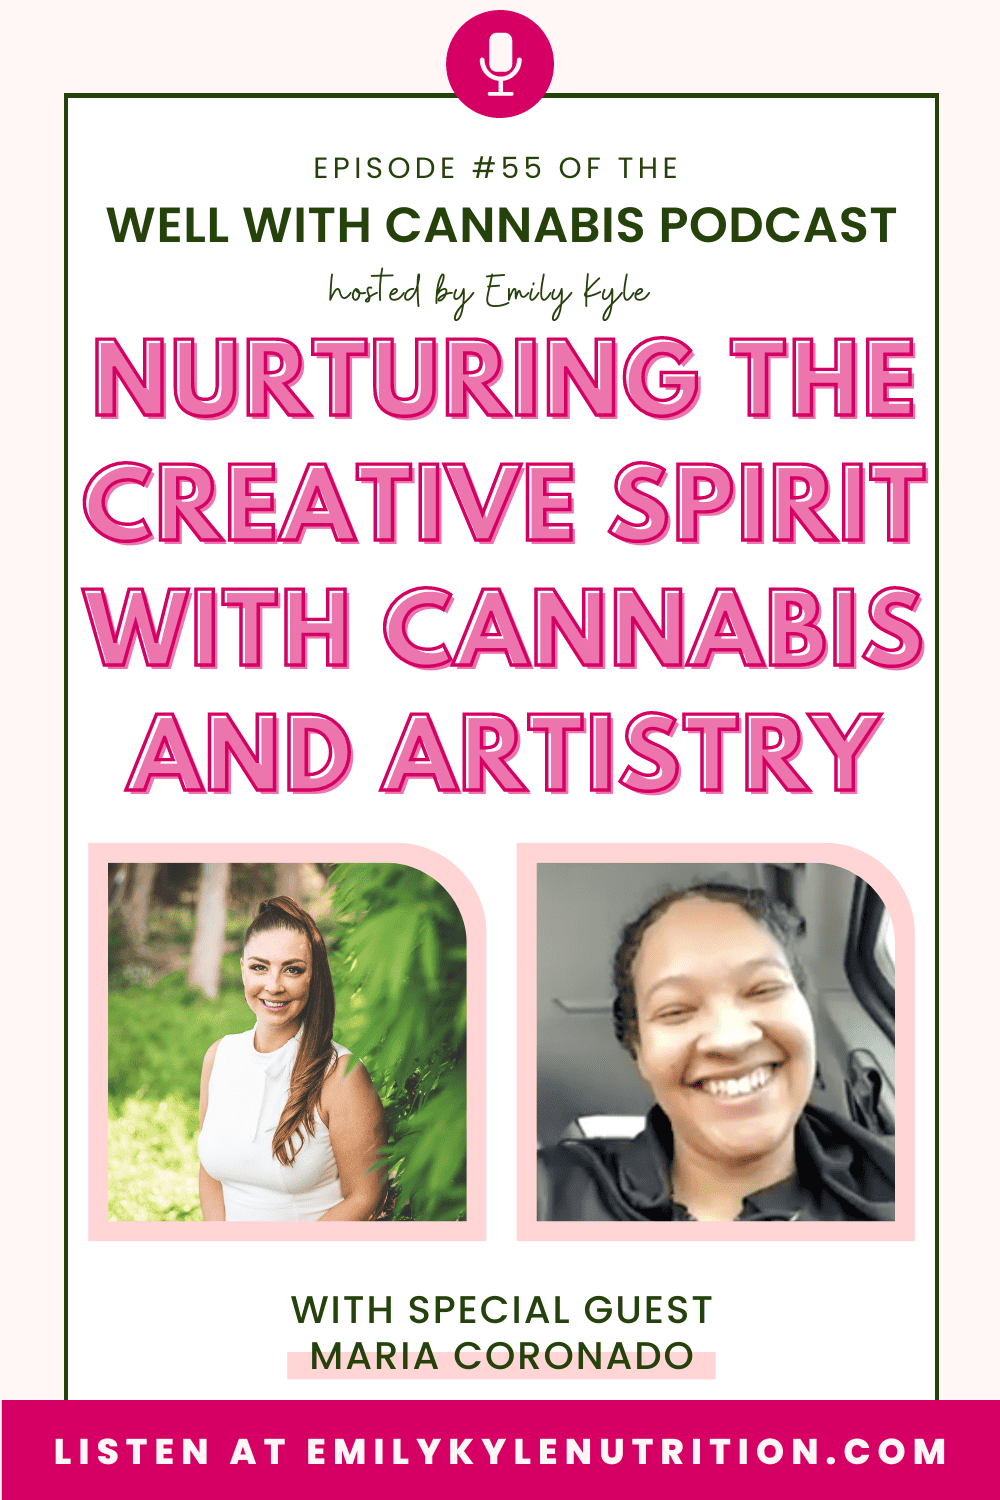 A picture of Maria Coronado, a guest on the Well With Cannabis podcast.